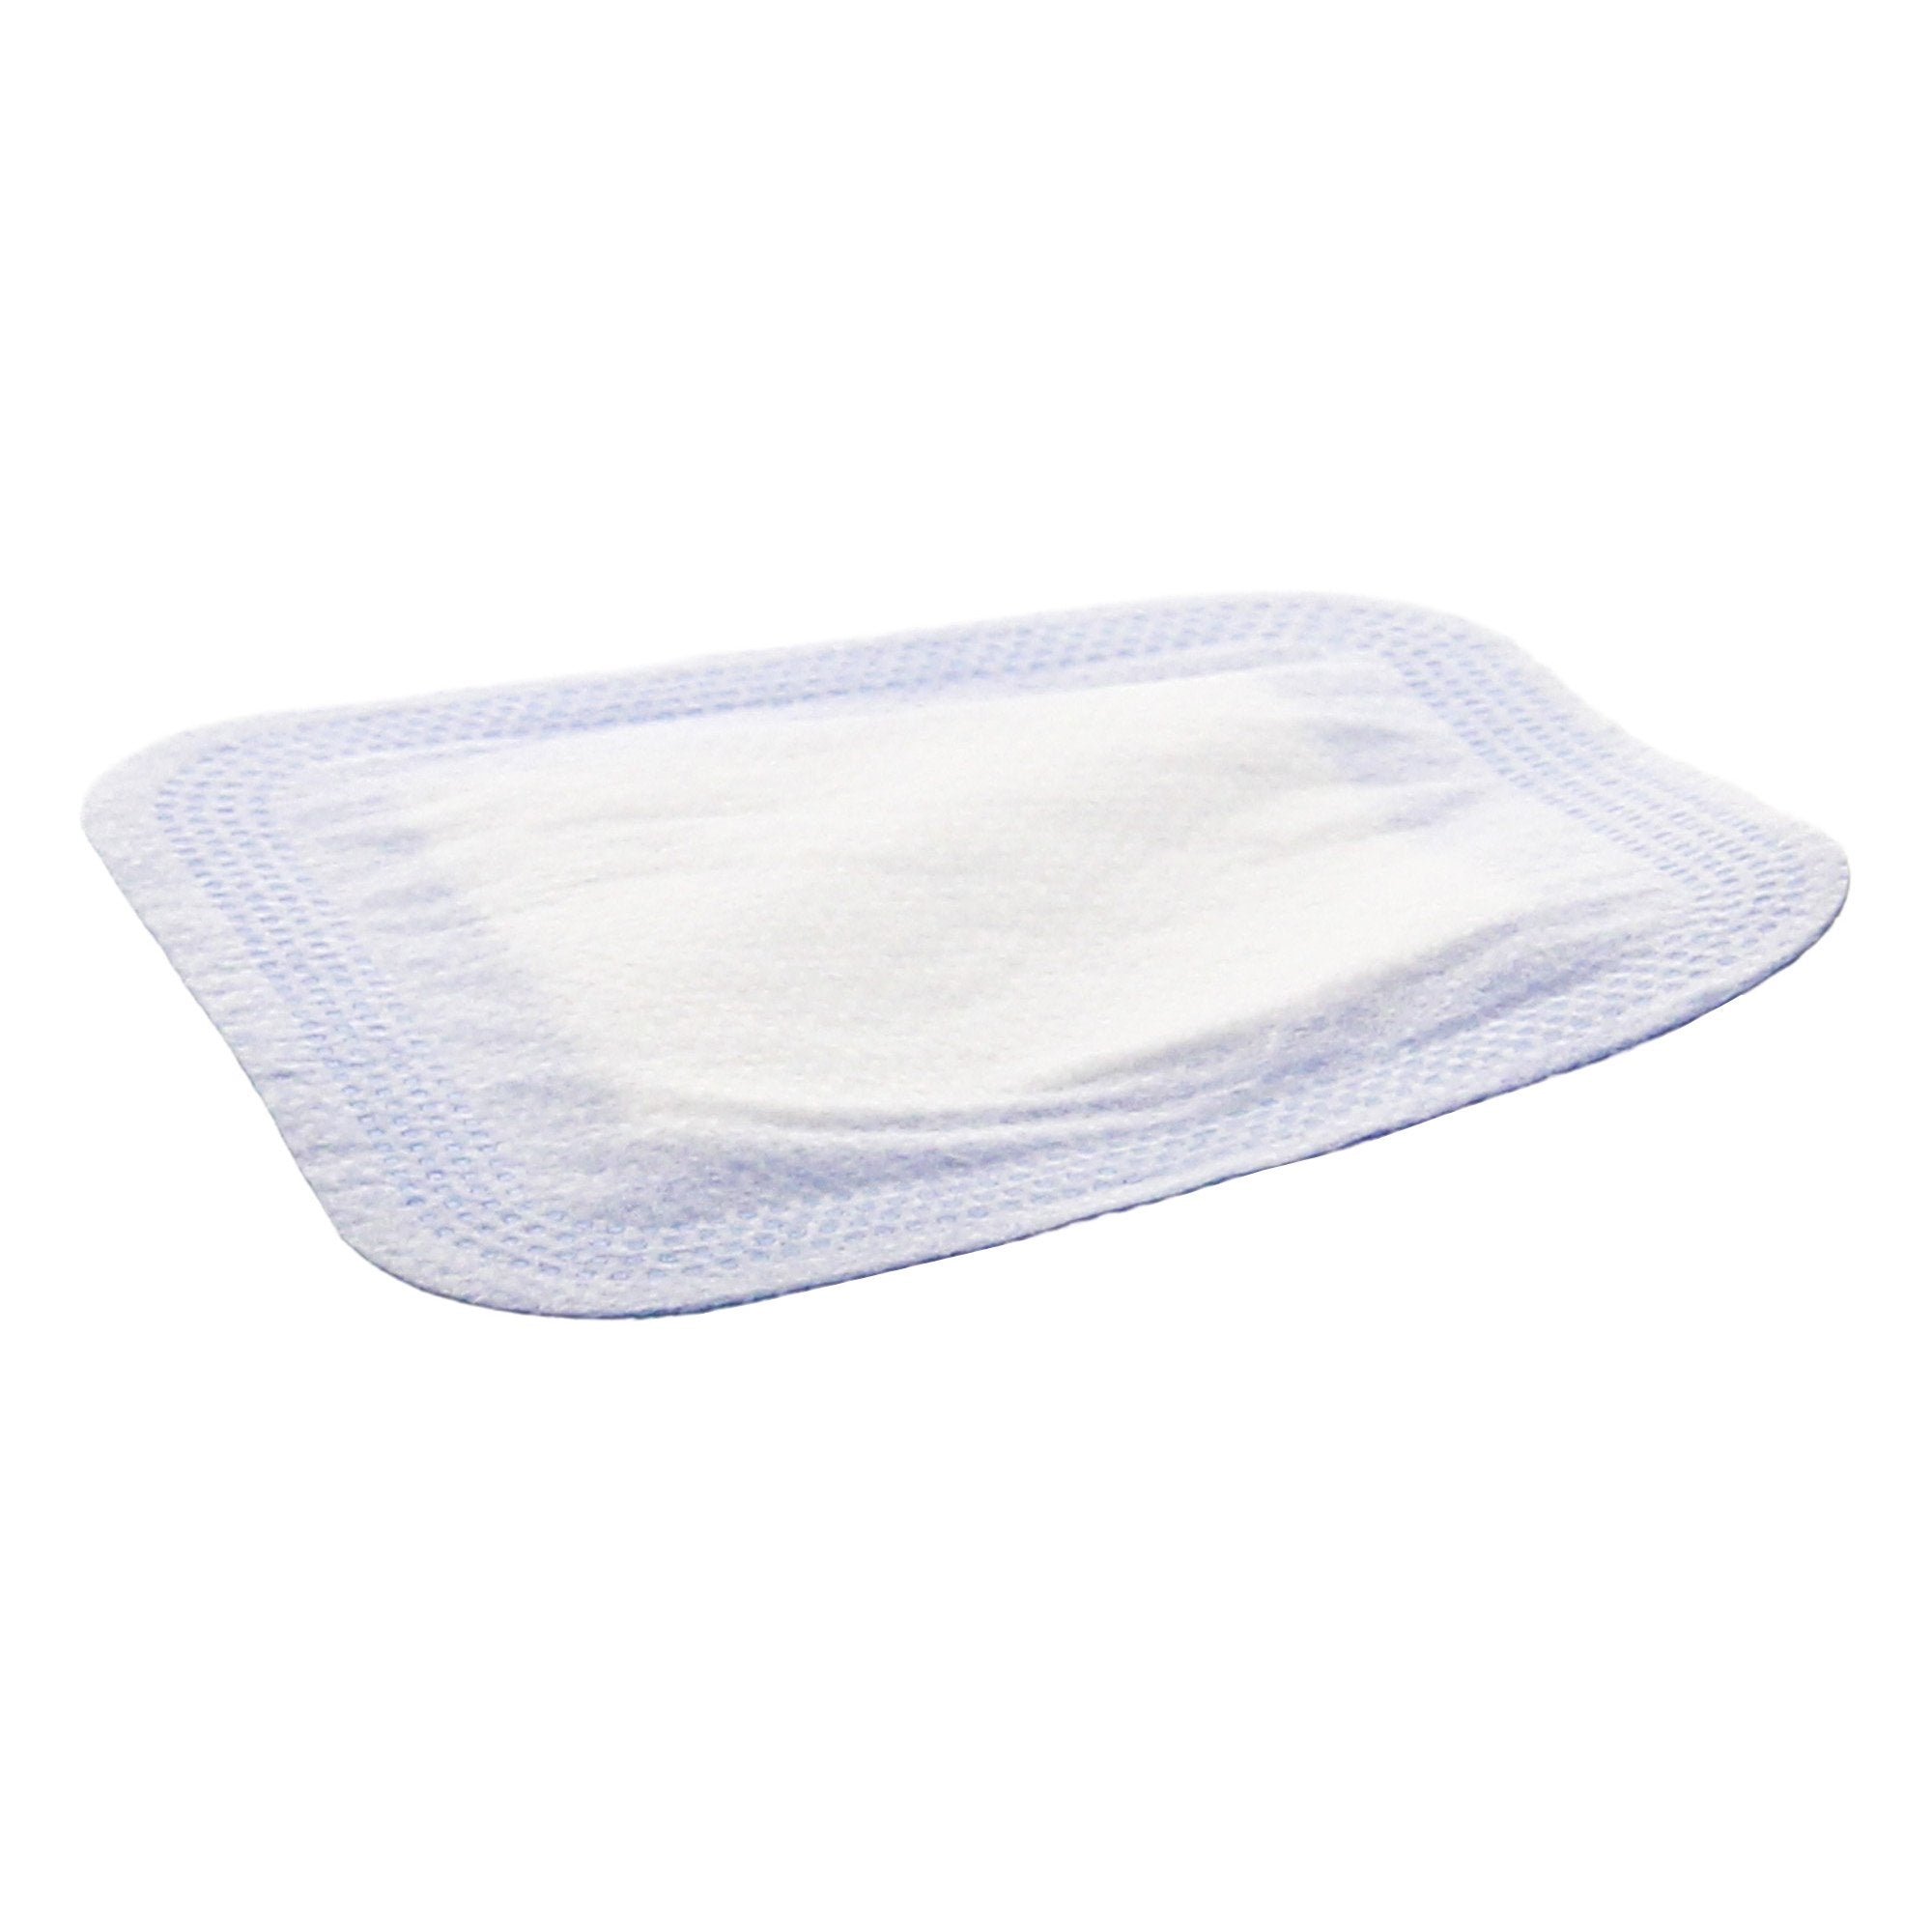 Super Absorbent Dressing HydraLock™ SA 4 X 4 Inch Square